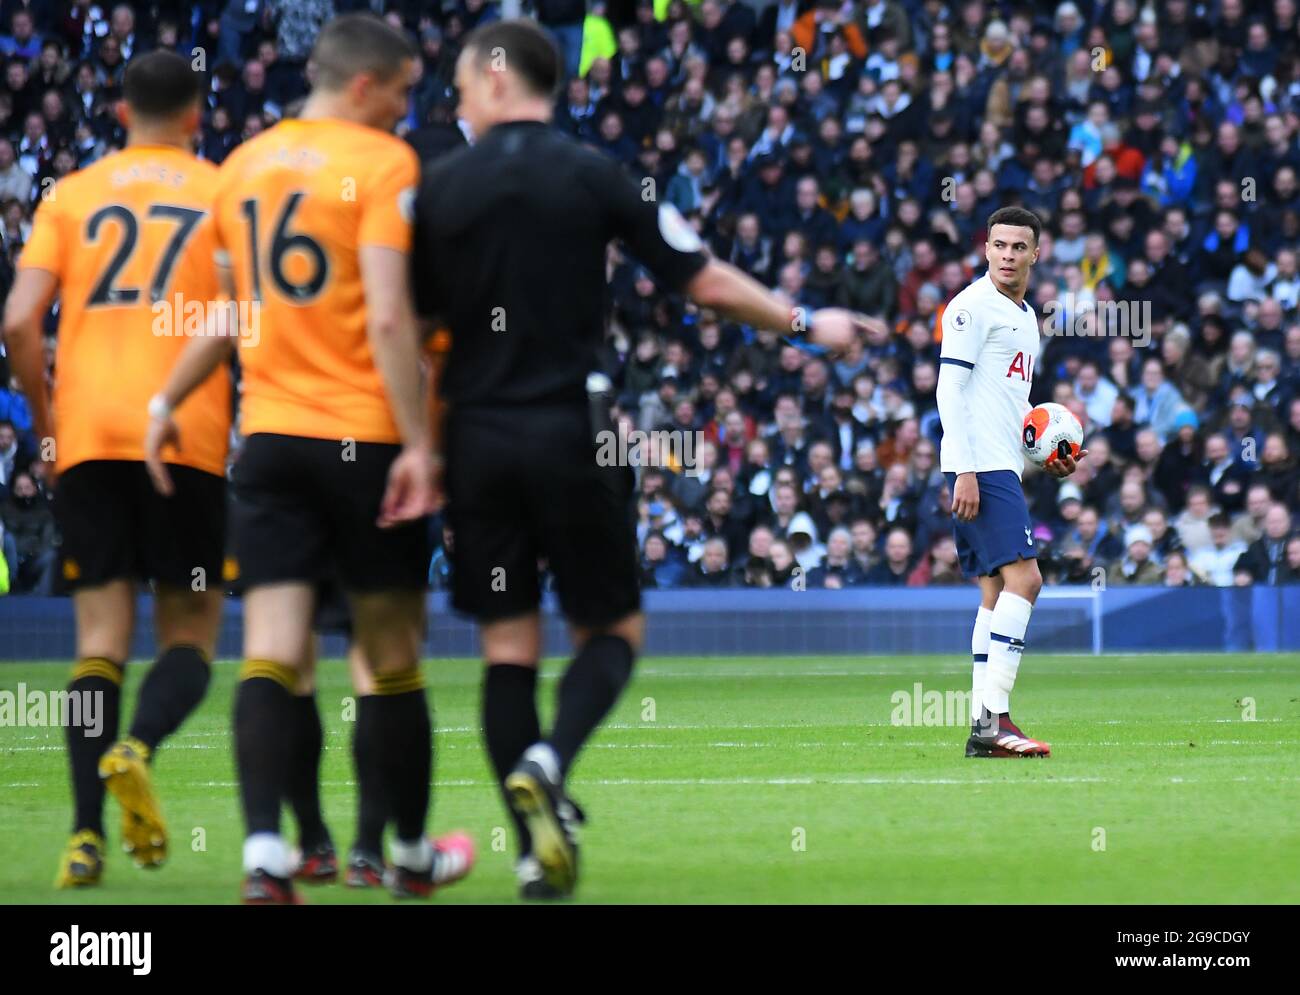 LONDON, ENGLAND - MArch 1, 2020: Dele Alli of Tottenham looks on as Wolves players were celebrating a goal during the 2020/21 Premier League game between Tottenham Hotspur FC and Wolverhampton FC at Tottenham Hotspur Stadium. Stock Photo